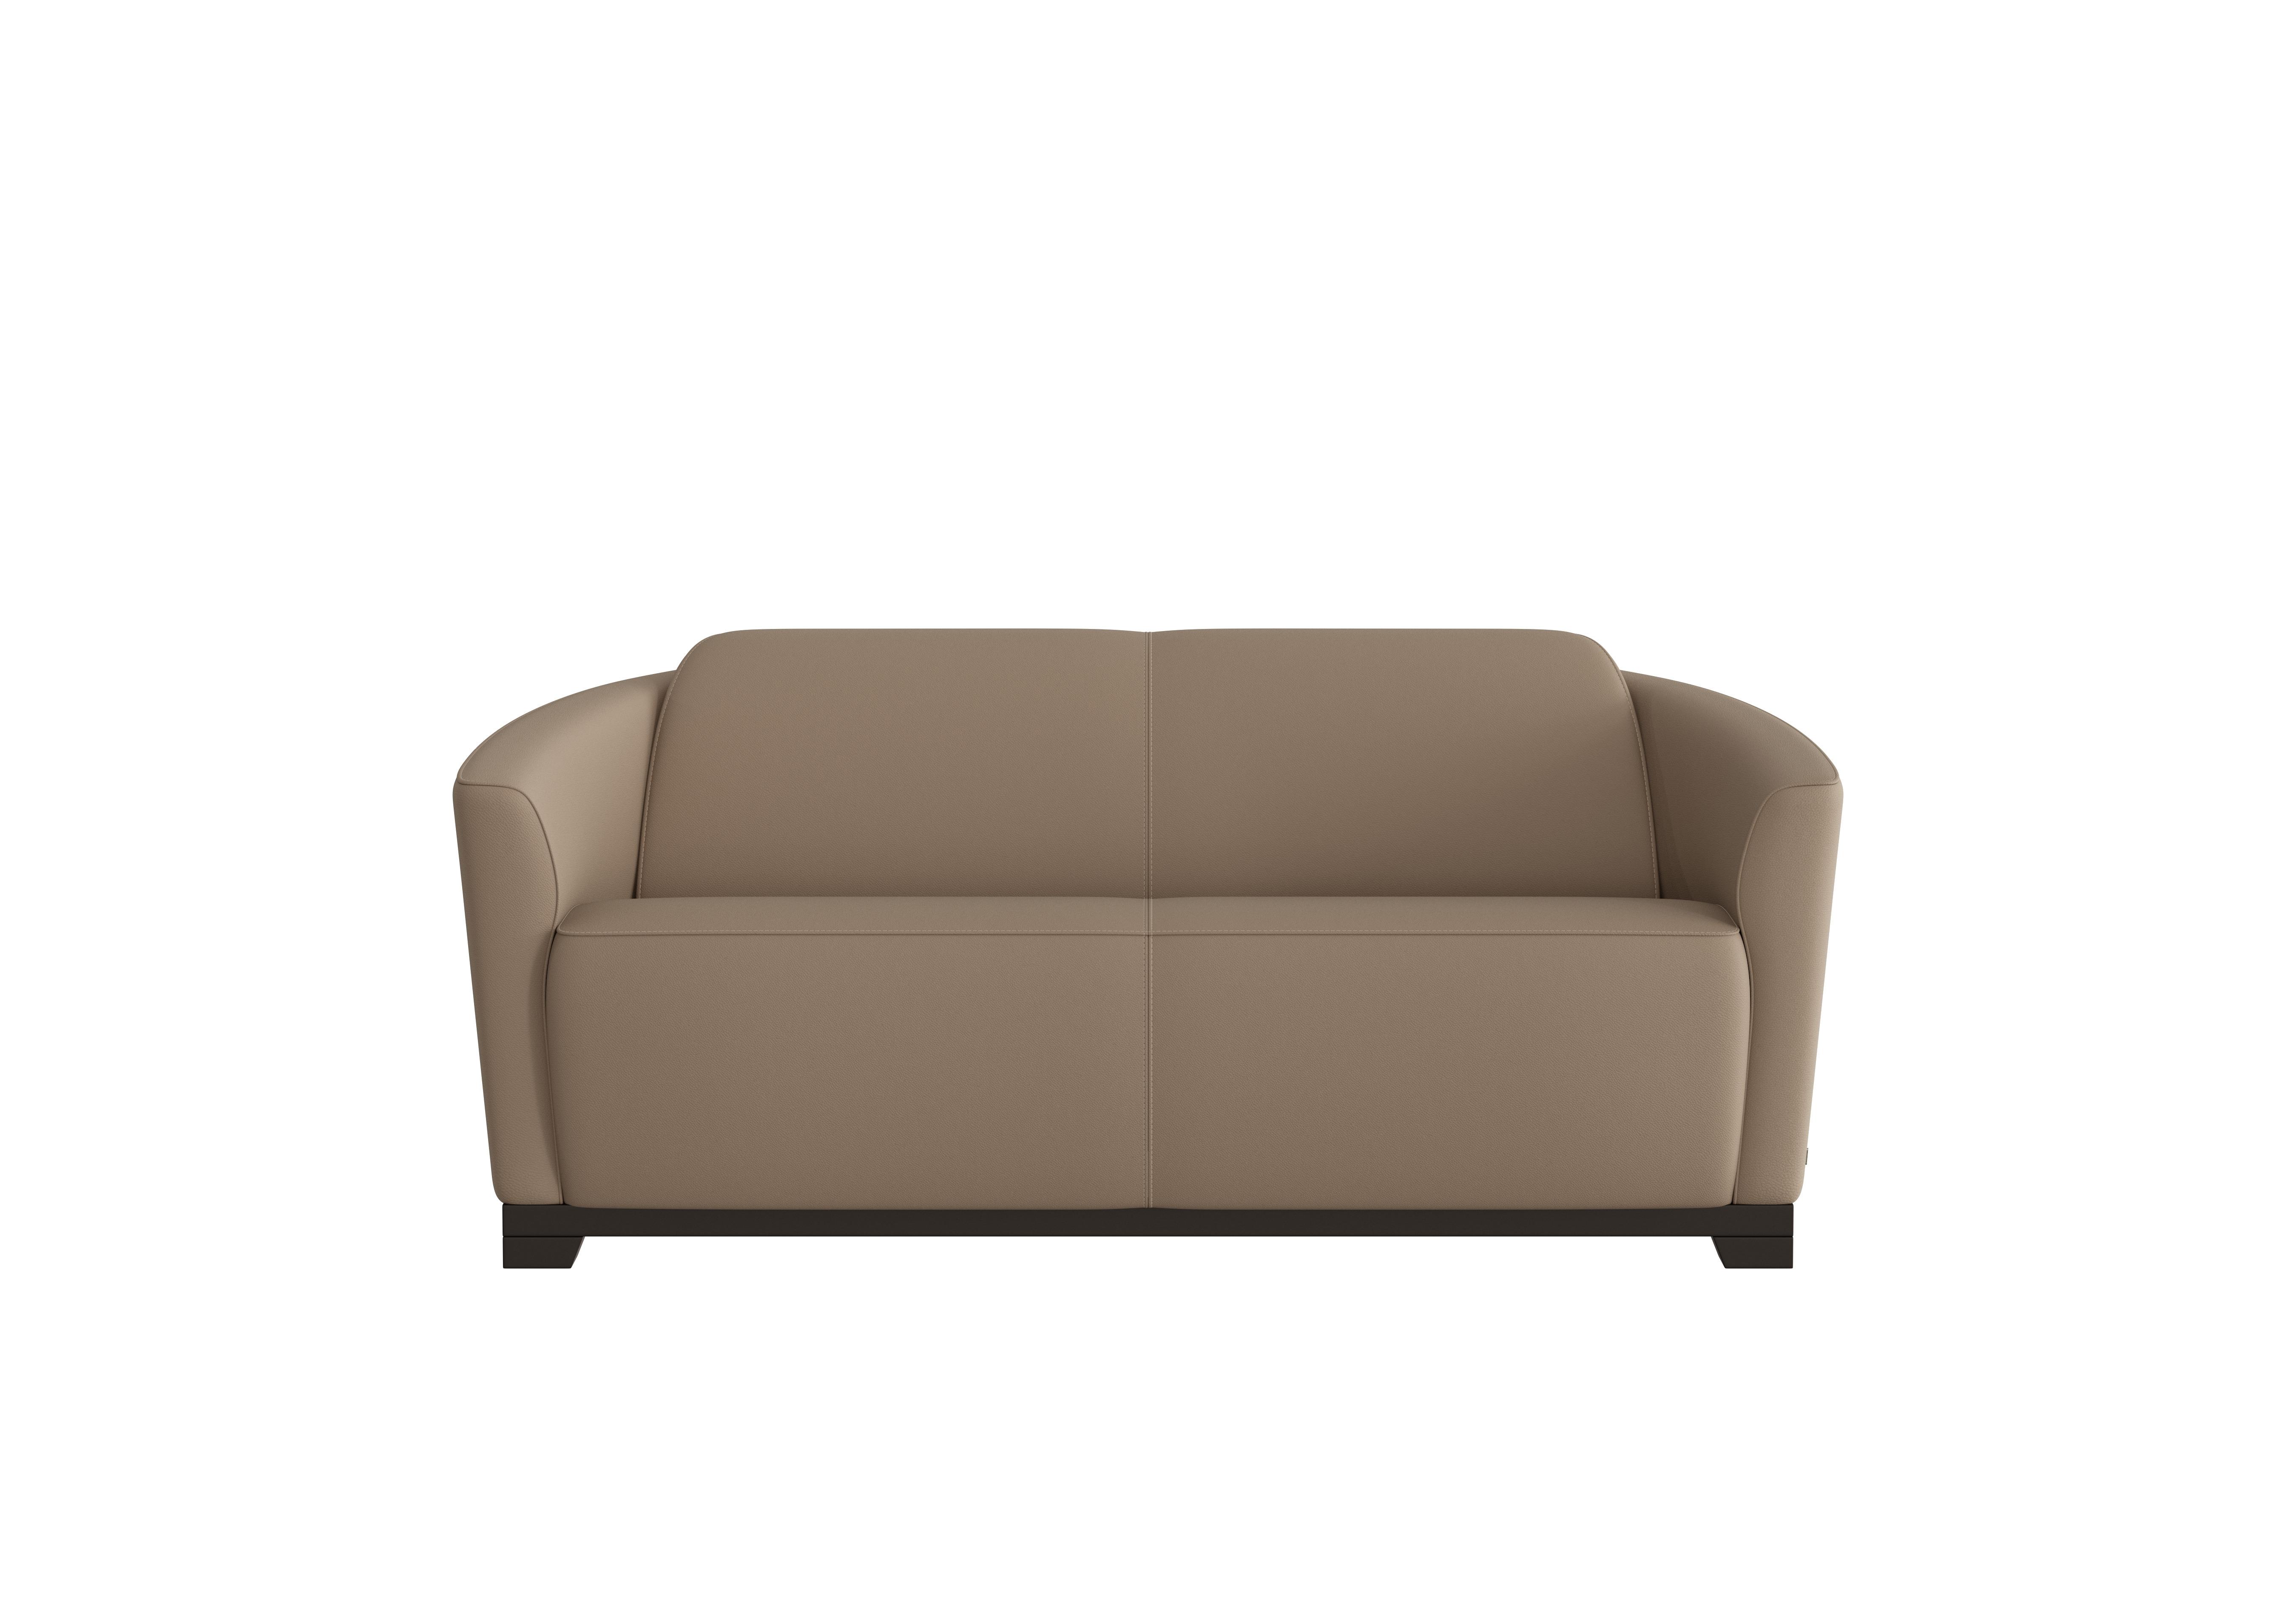 Ketty 2.5 Seater Leather Sofa in Torello Taupe 312 on Furniture Village